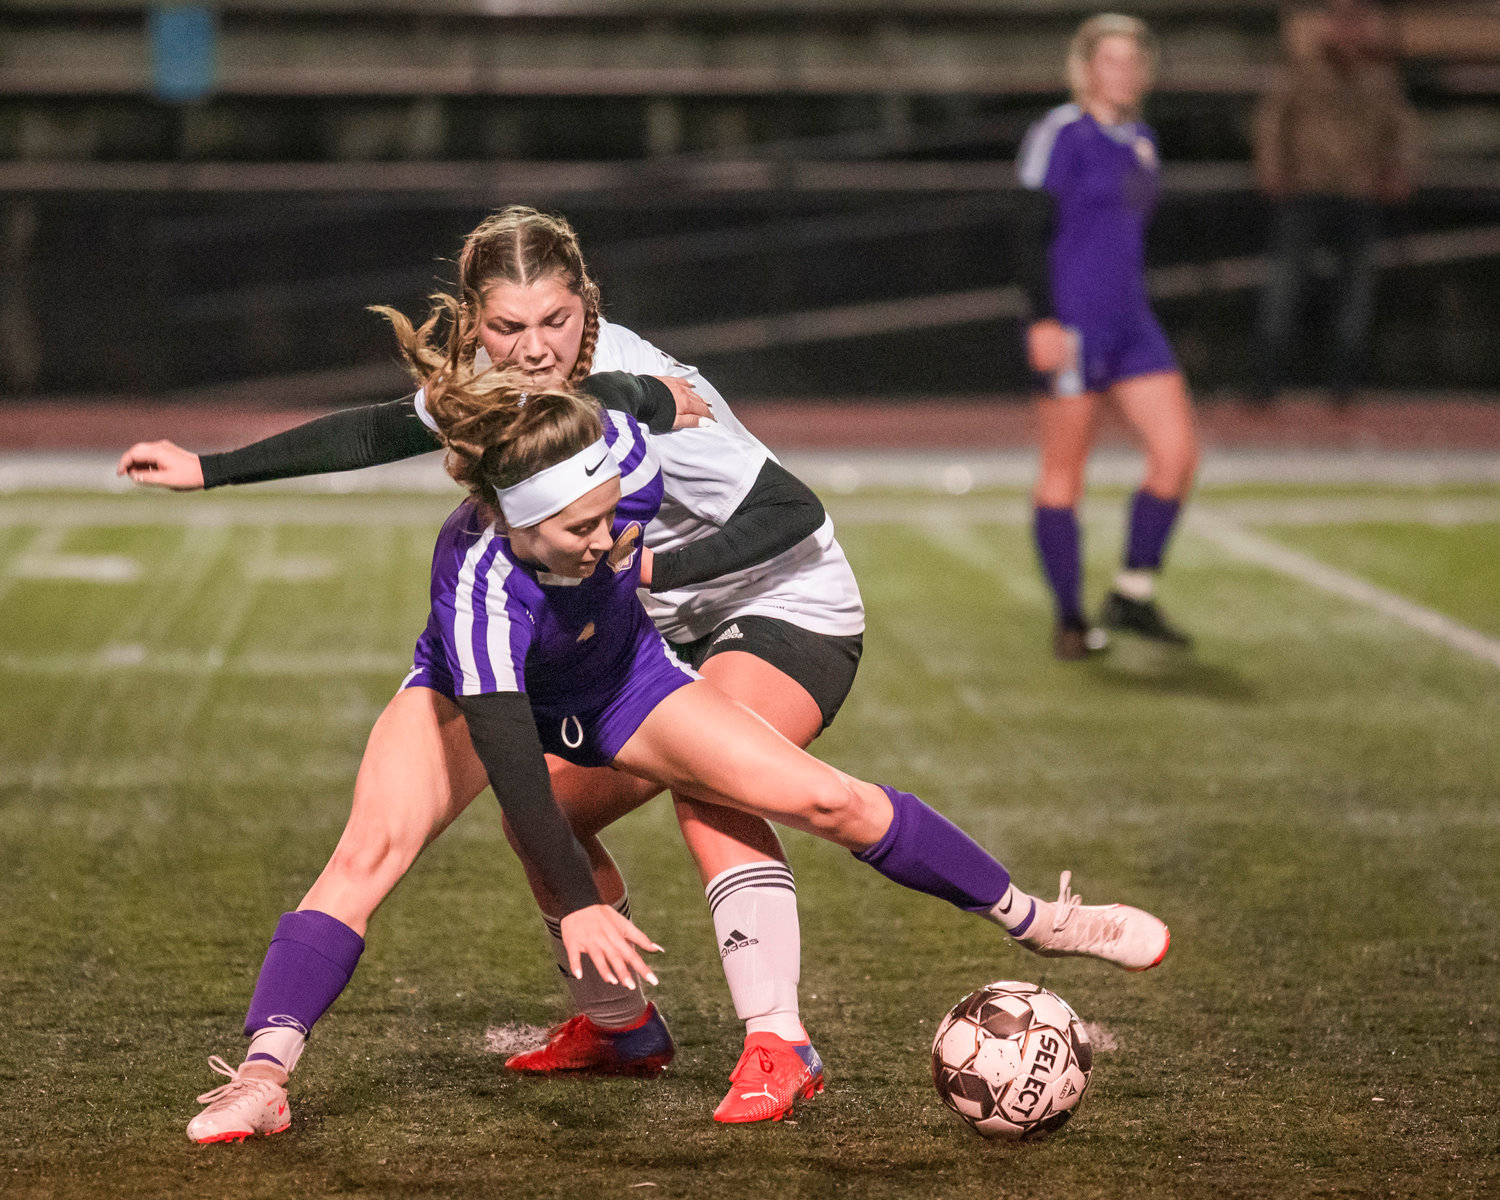 Onalaska’s Cierra Russ (1) fights for possession of the ball during a game against Reardan in Centralia Wednesday night.